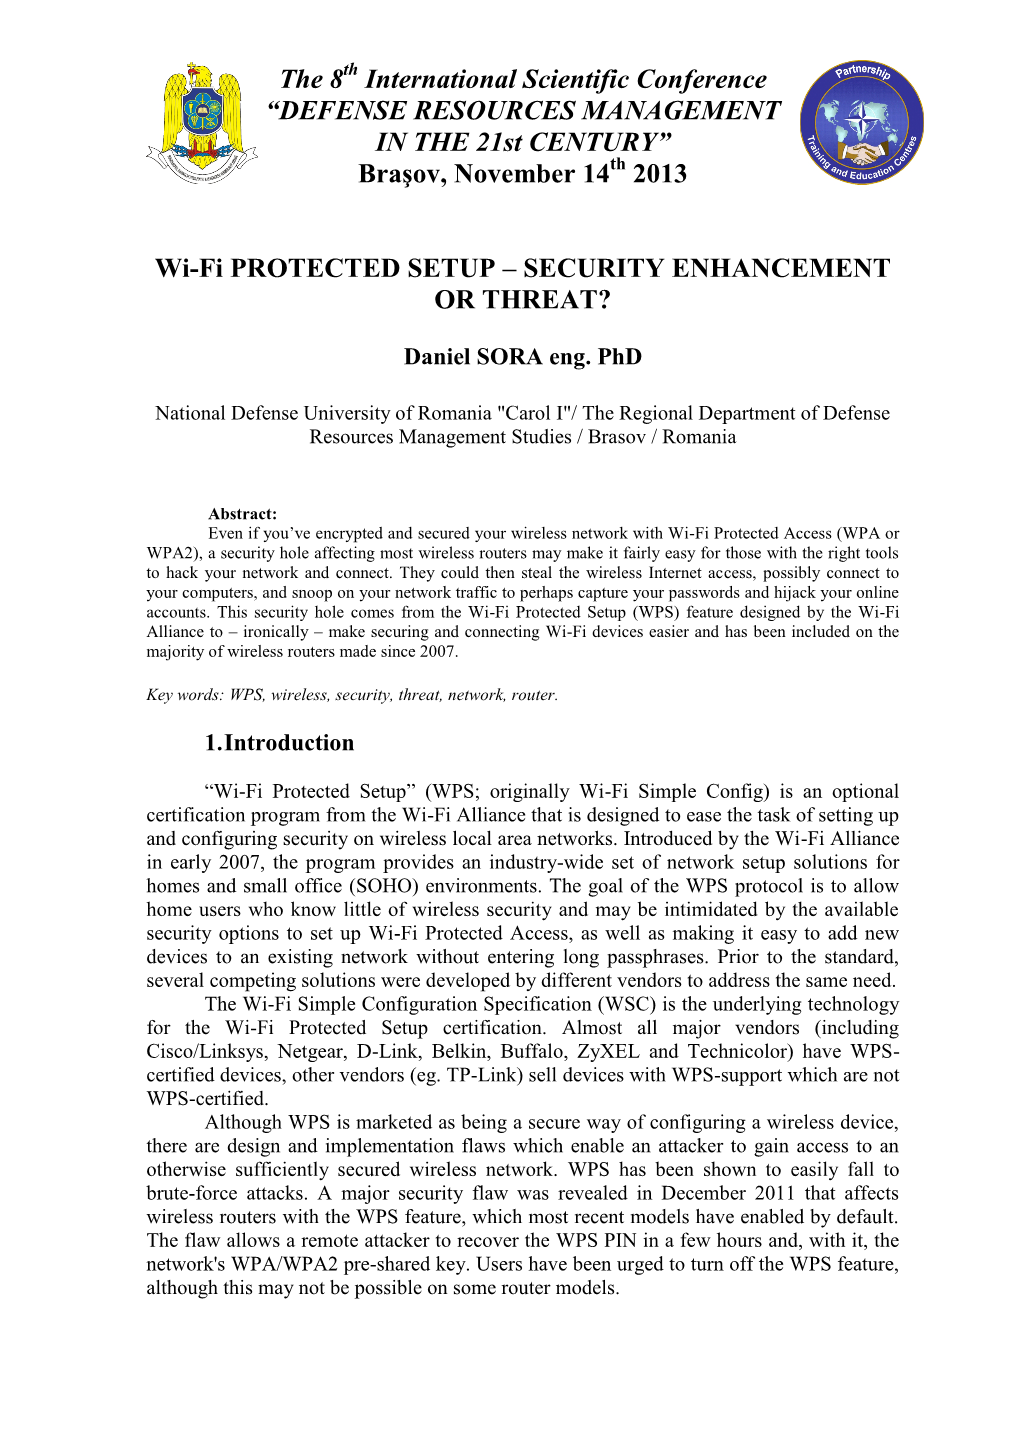 Wi-Fi PROTECTED SETUP – SECURITY ENHANCEMENT OR THREAT?